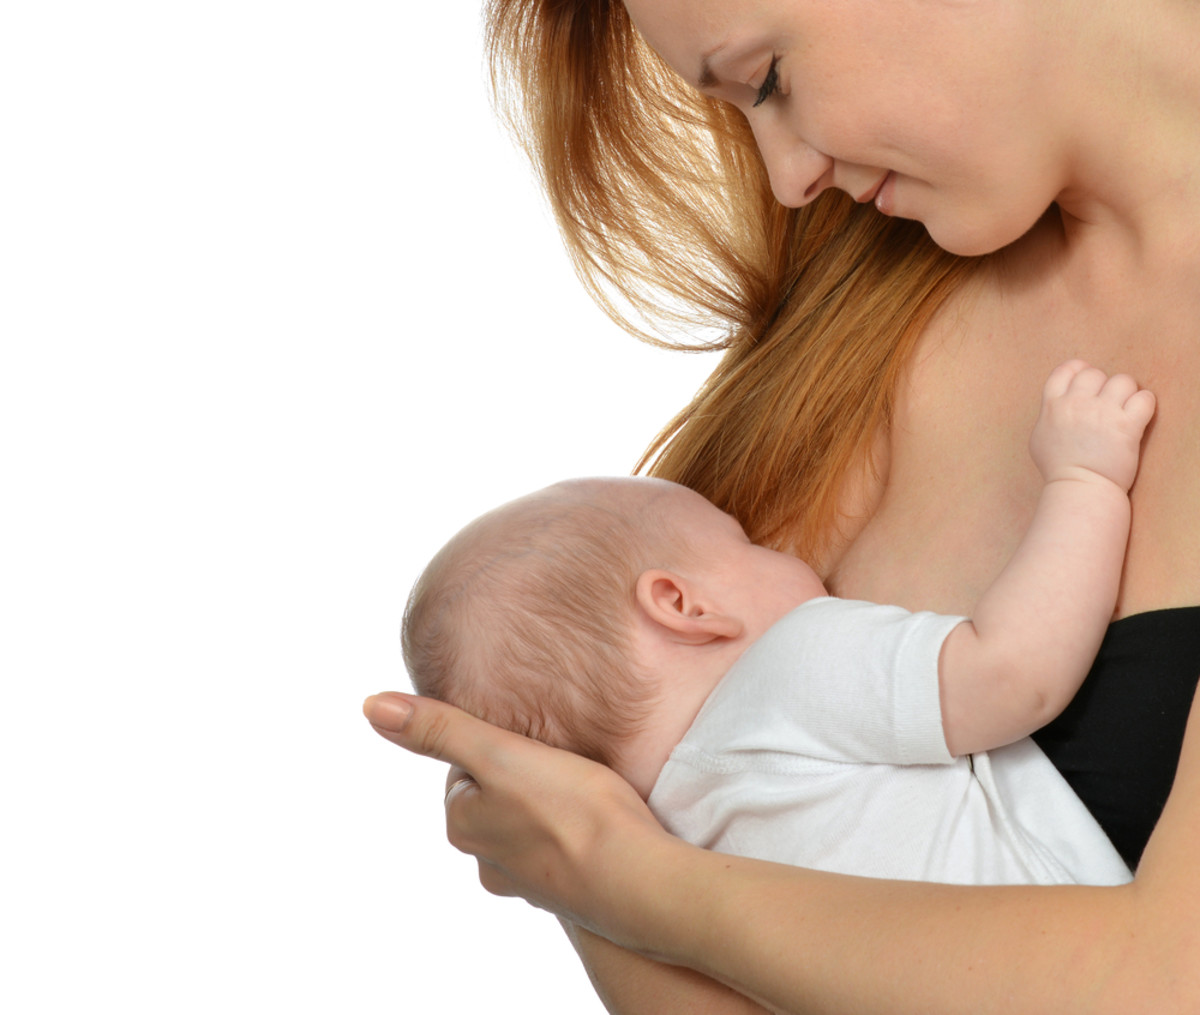 A "Serious Dose" of Pesticide Residue Found in Breast Milk, Study Finds